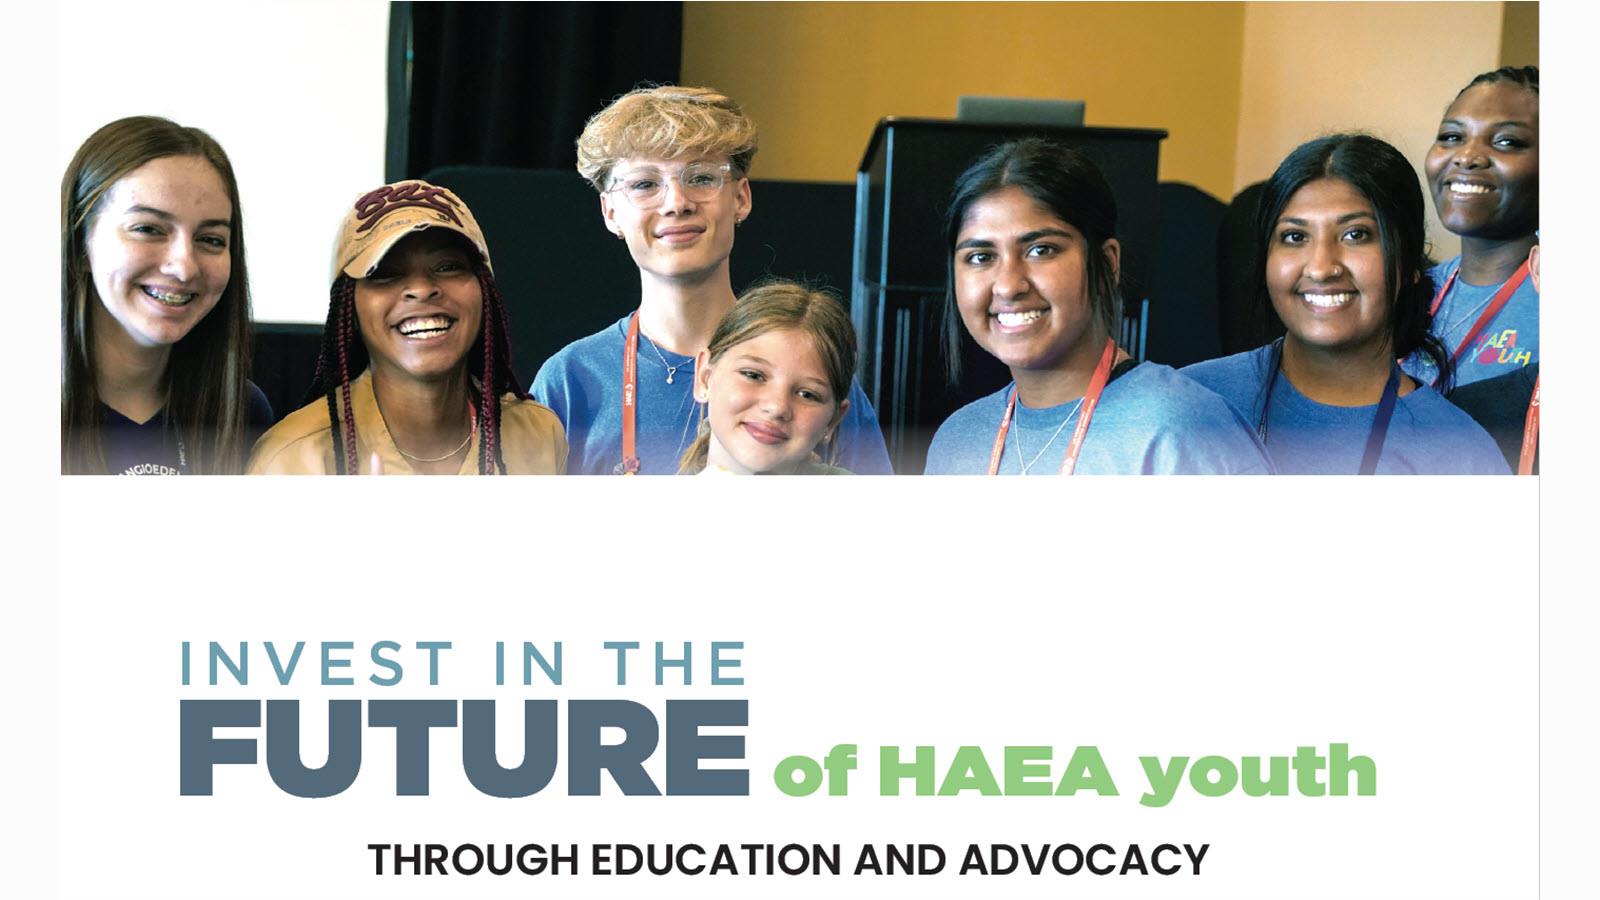 Invest in the future of HAE youth - photo is of a group of students